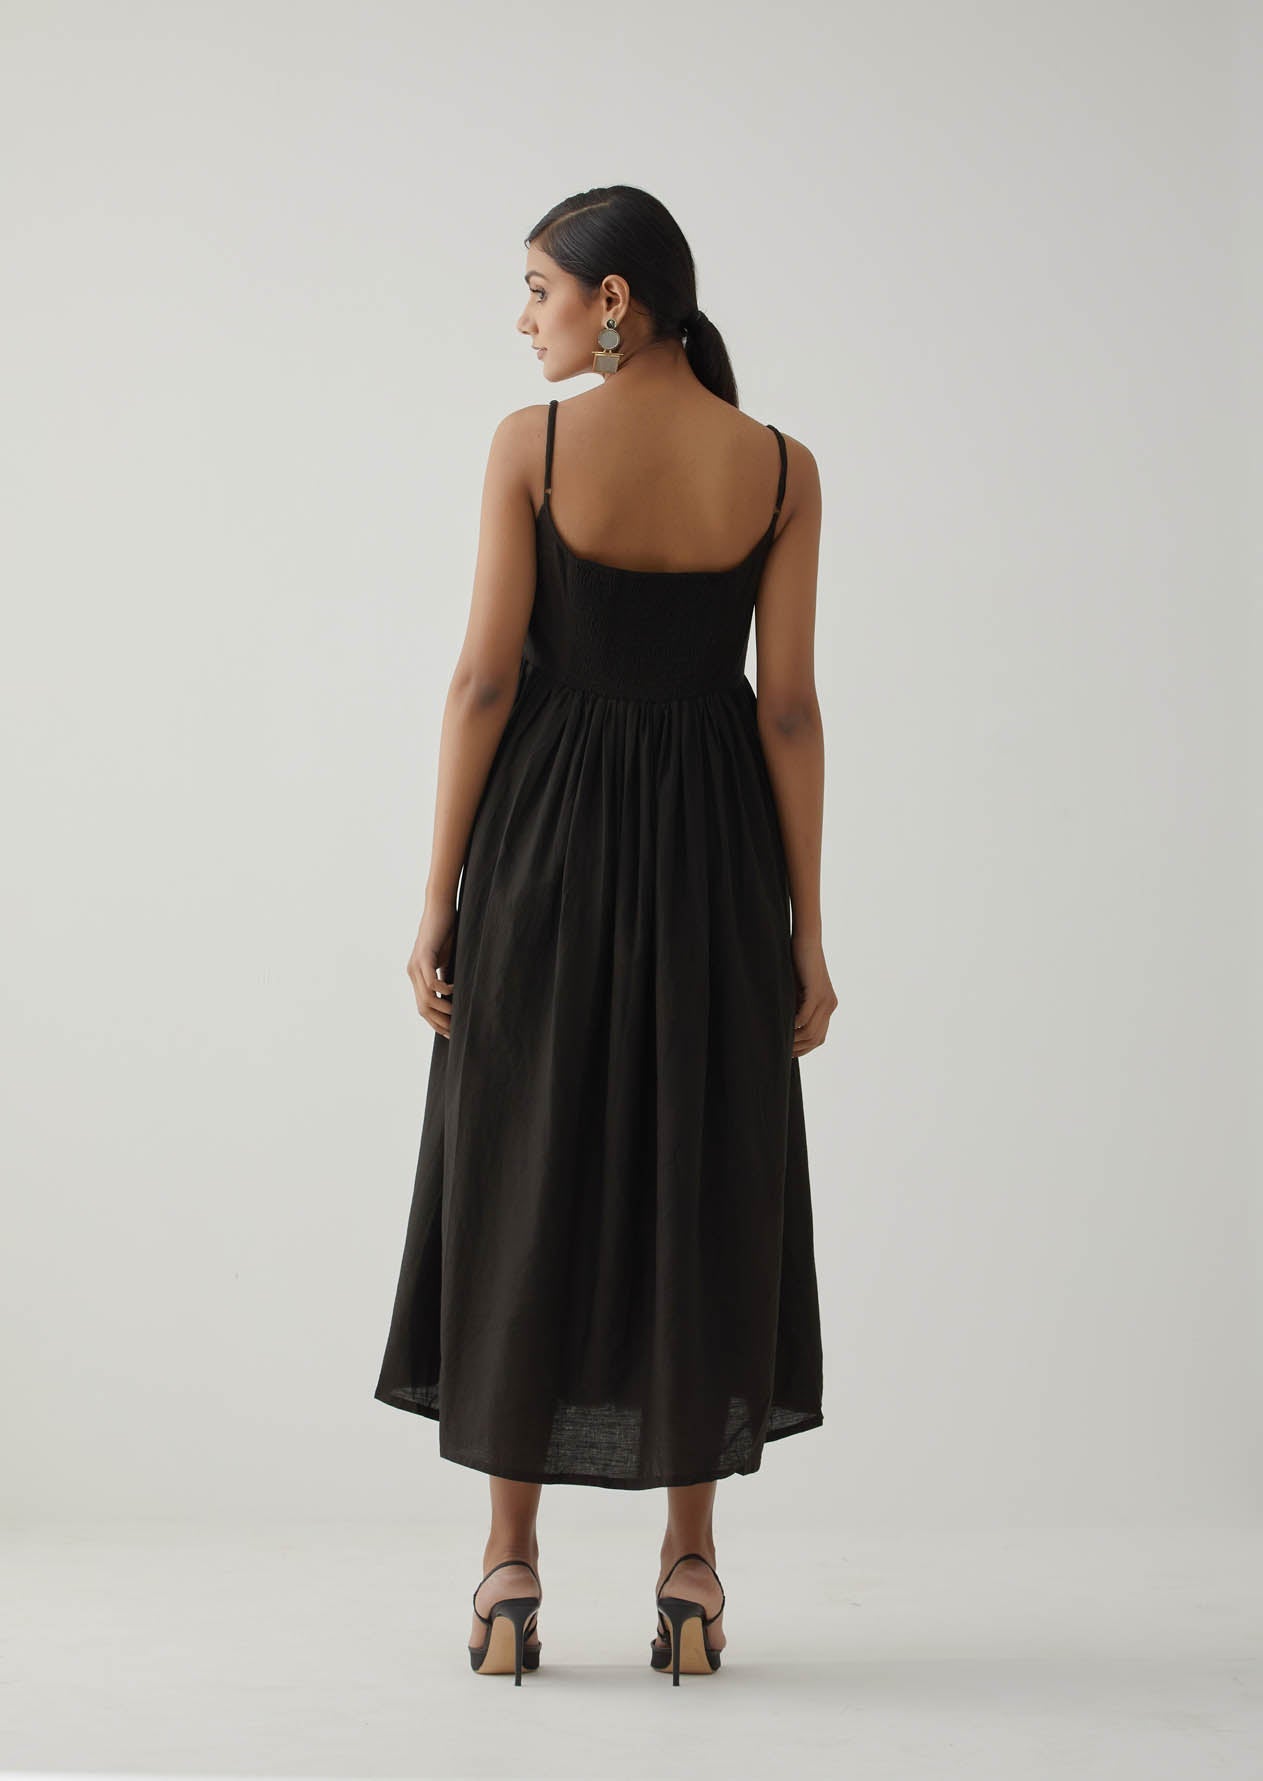 Black Strappy Rigel Dress - The Indian Cause